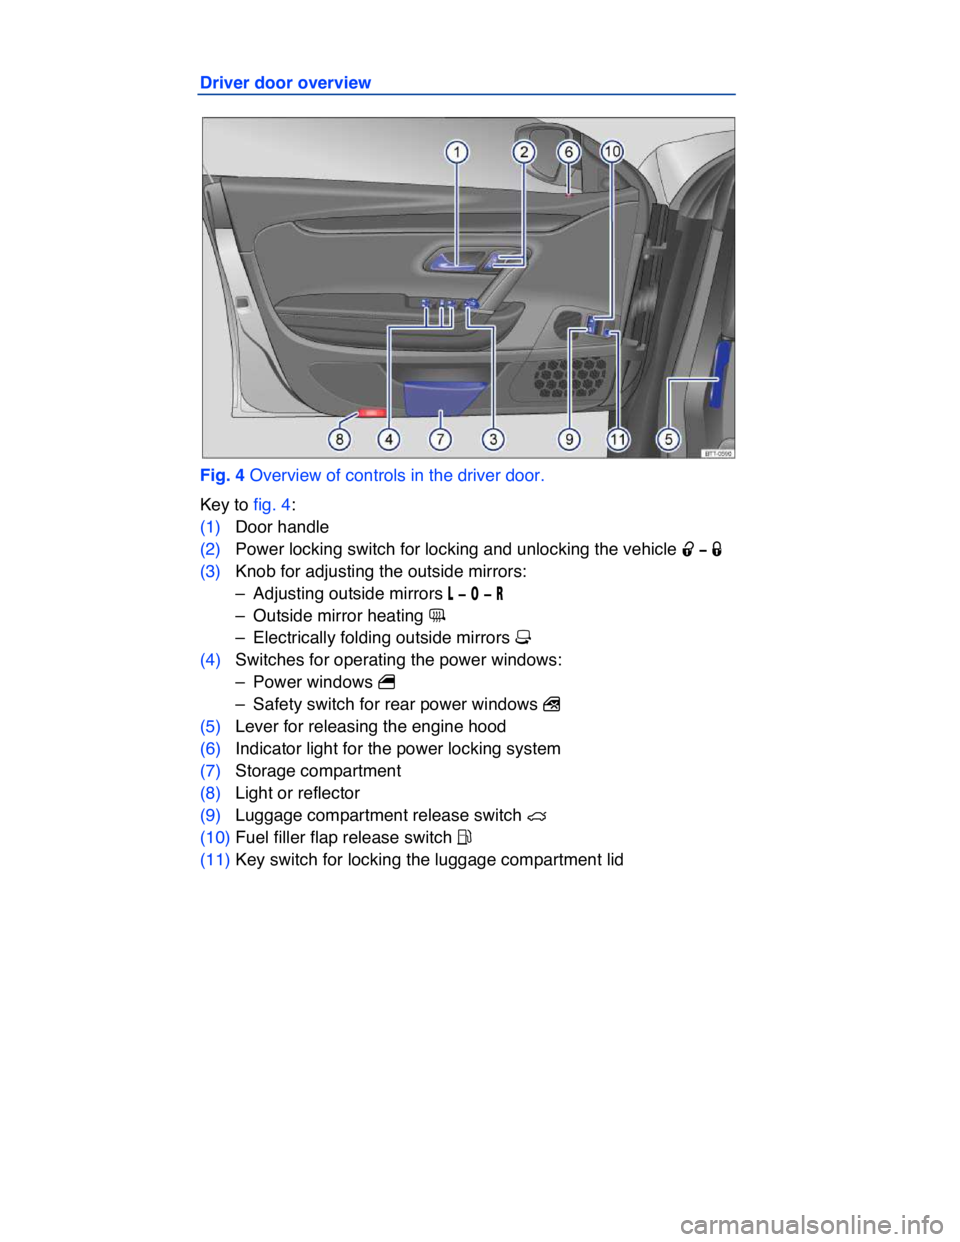 VOLKSWAGEN CC 2015  Owner´s Manual  
Driver door overview 
 
Fig. 4 Overview of controls in the driver door. 
Key to fig. 4: 
(1) Door handle  
(2) Power locking switch for locking and unlocking the vehicle �0 �